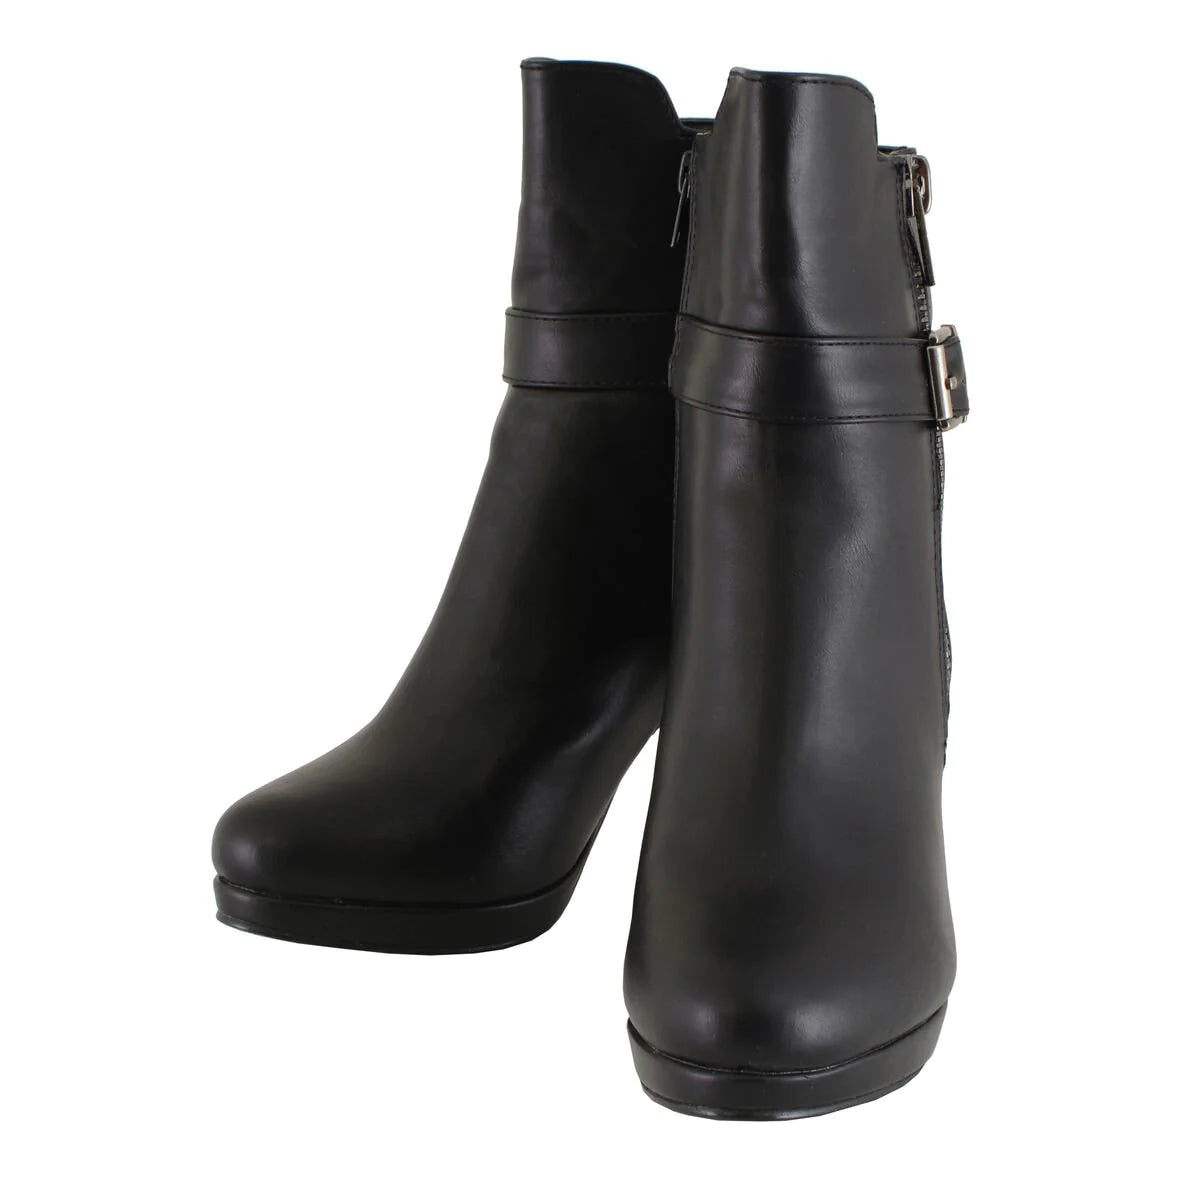 Womens Black Boots with Side Zipper Entry and Adjustable Buckle